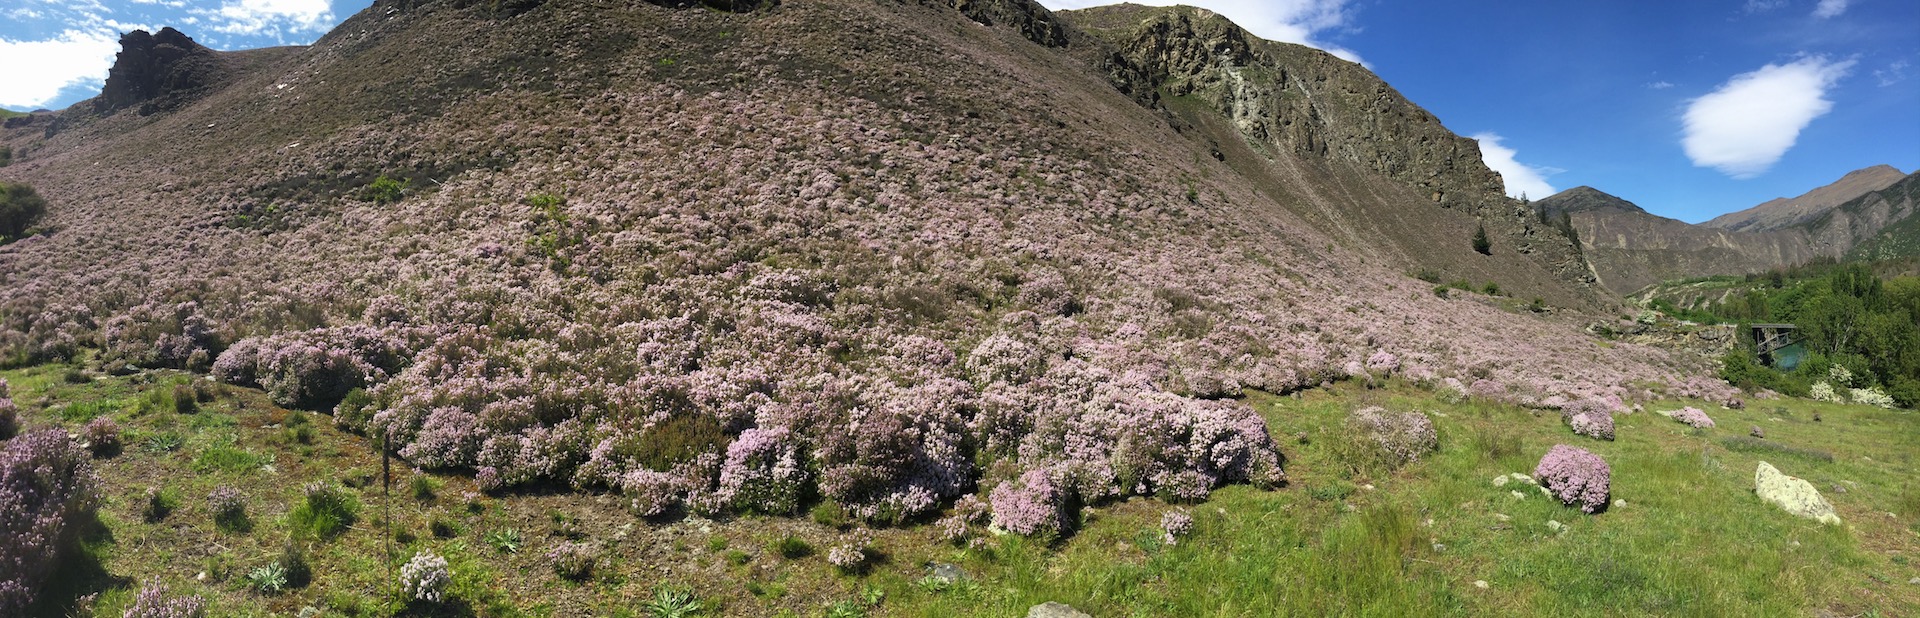 thyme on the steep mountains